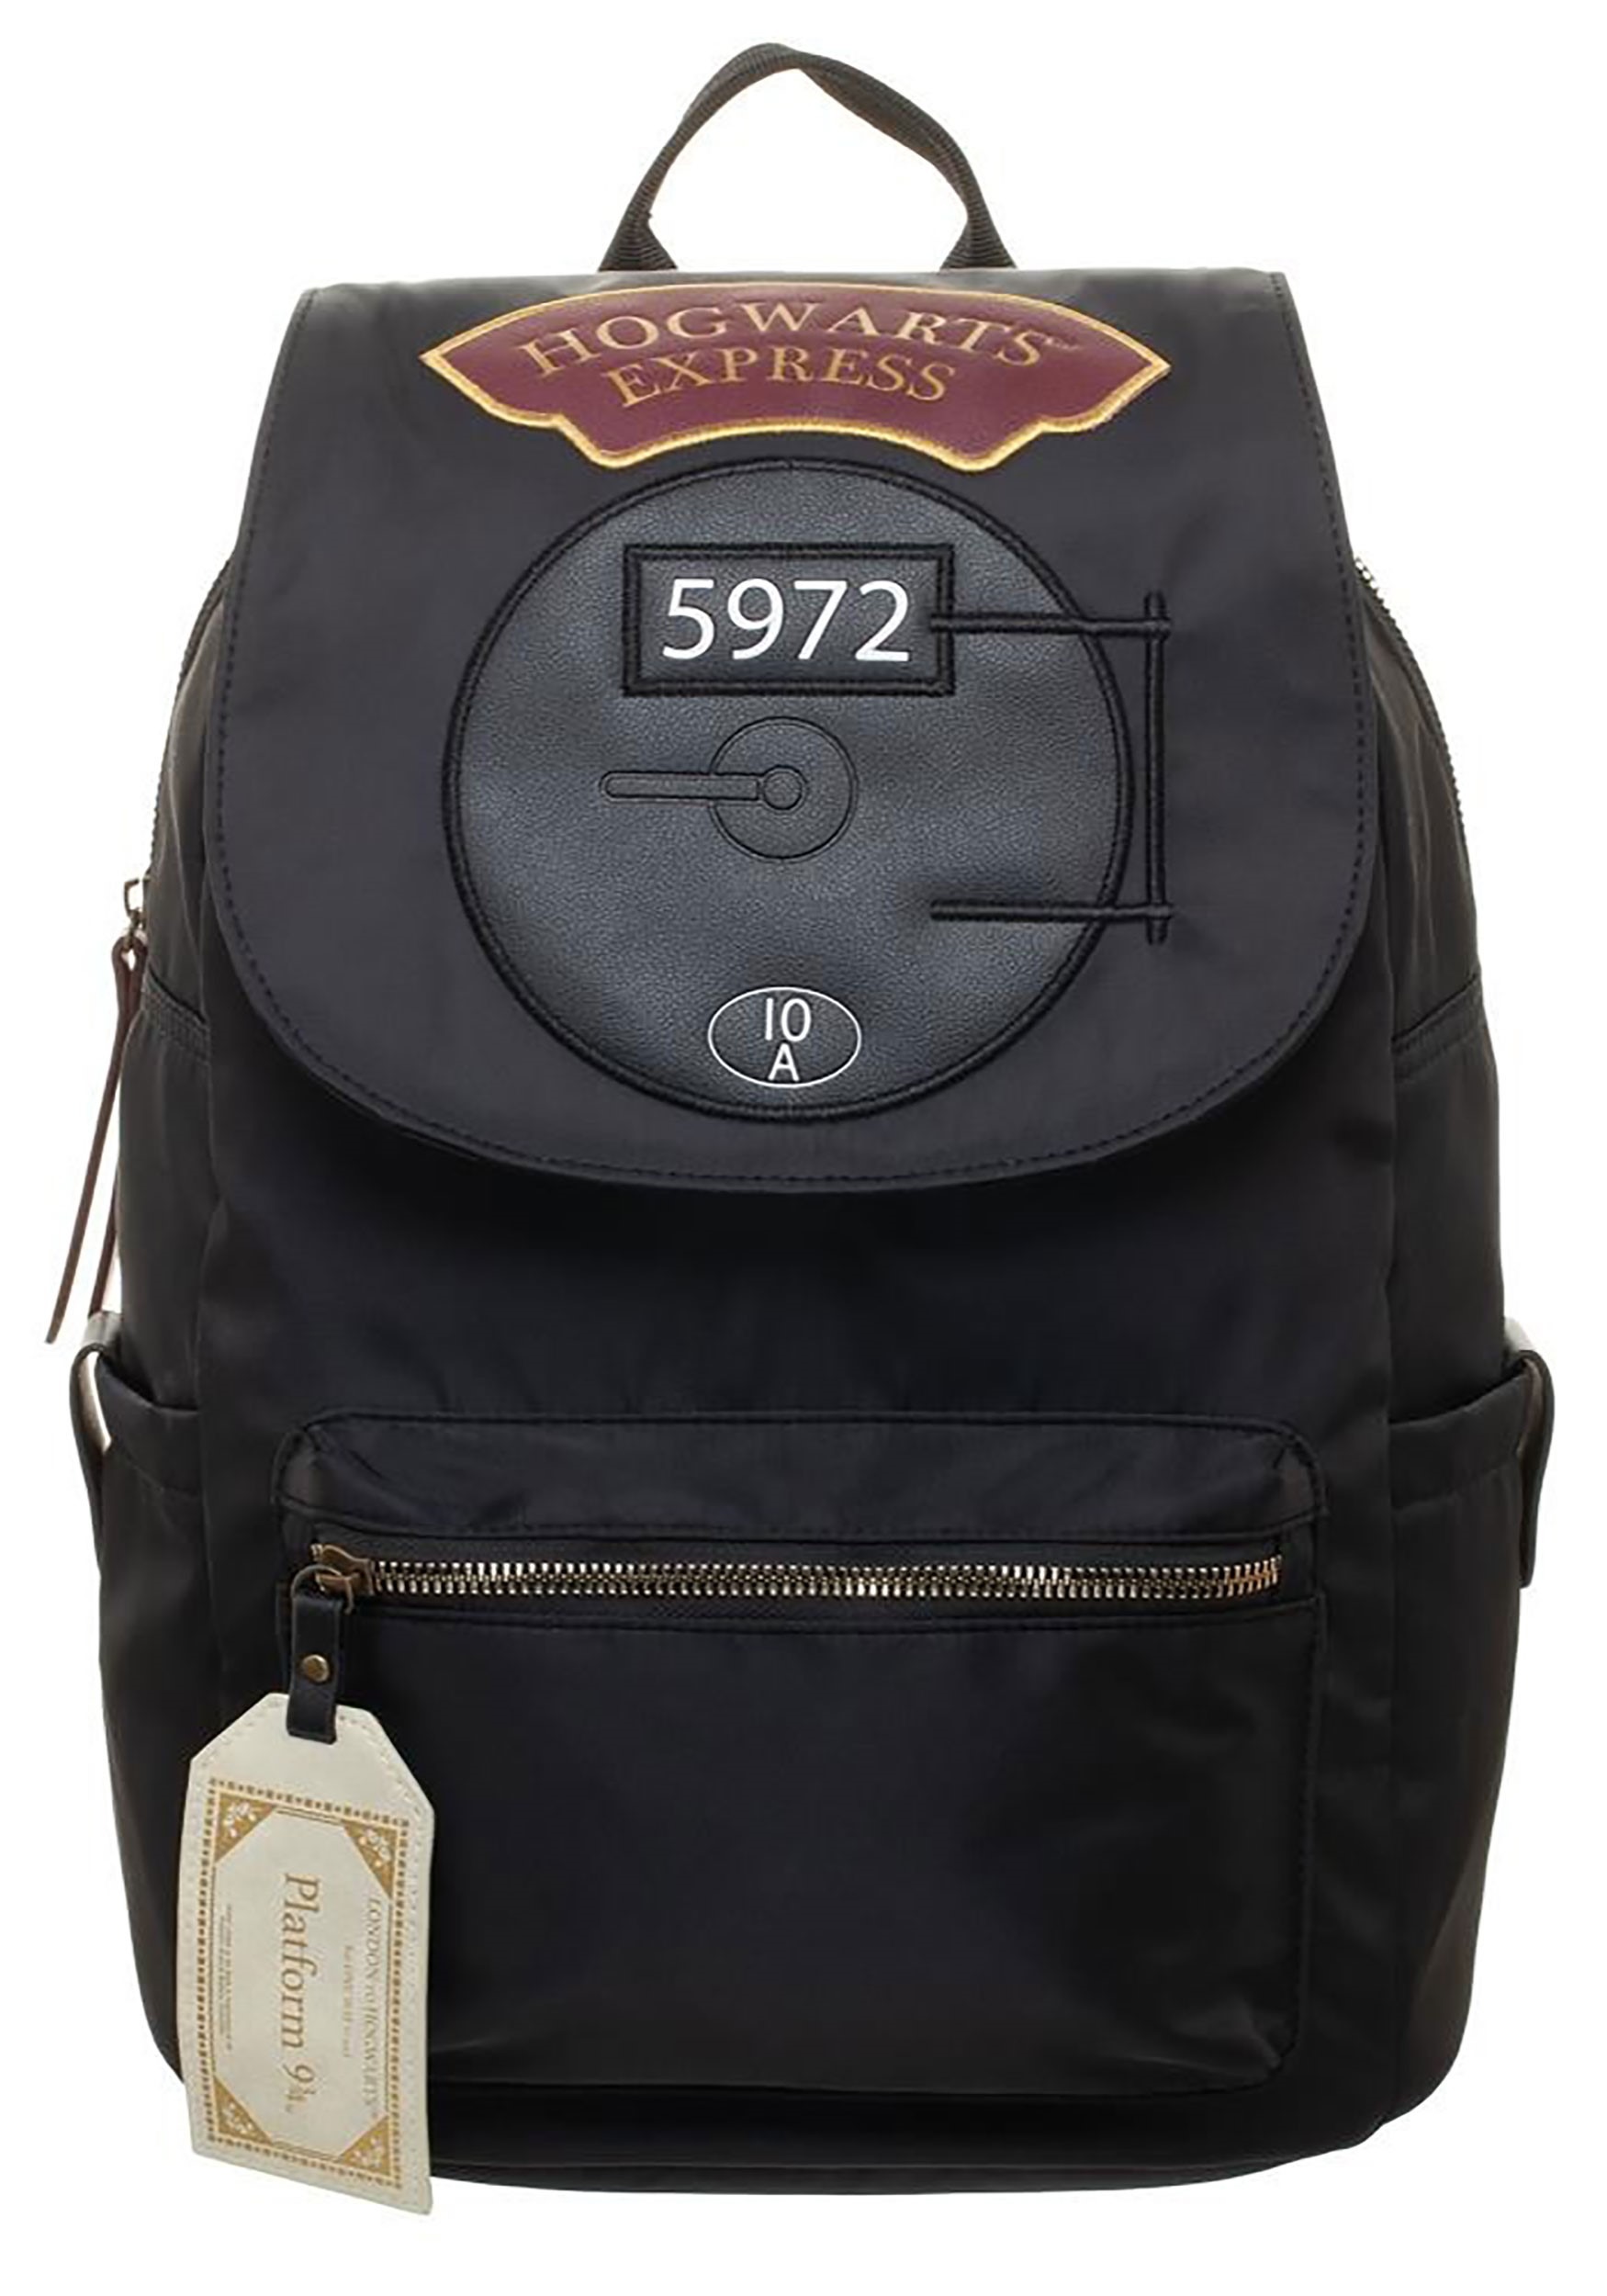 Harry potter backpack Gold Star Collection From Accessory Innovations 